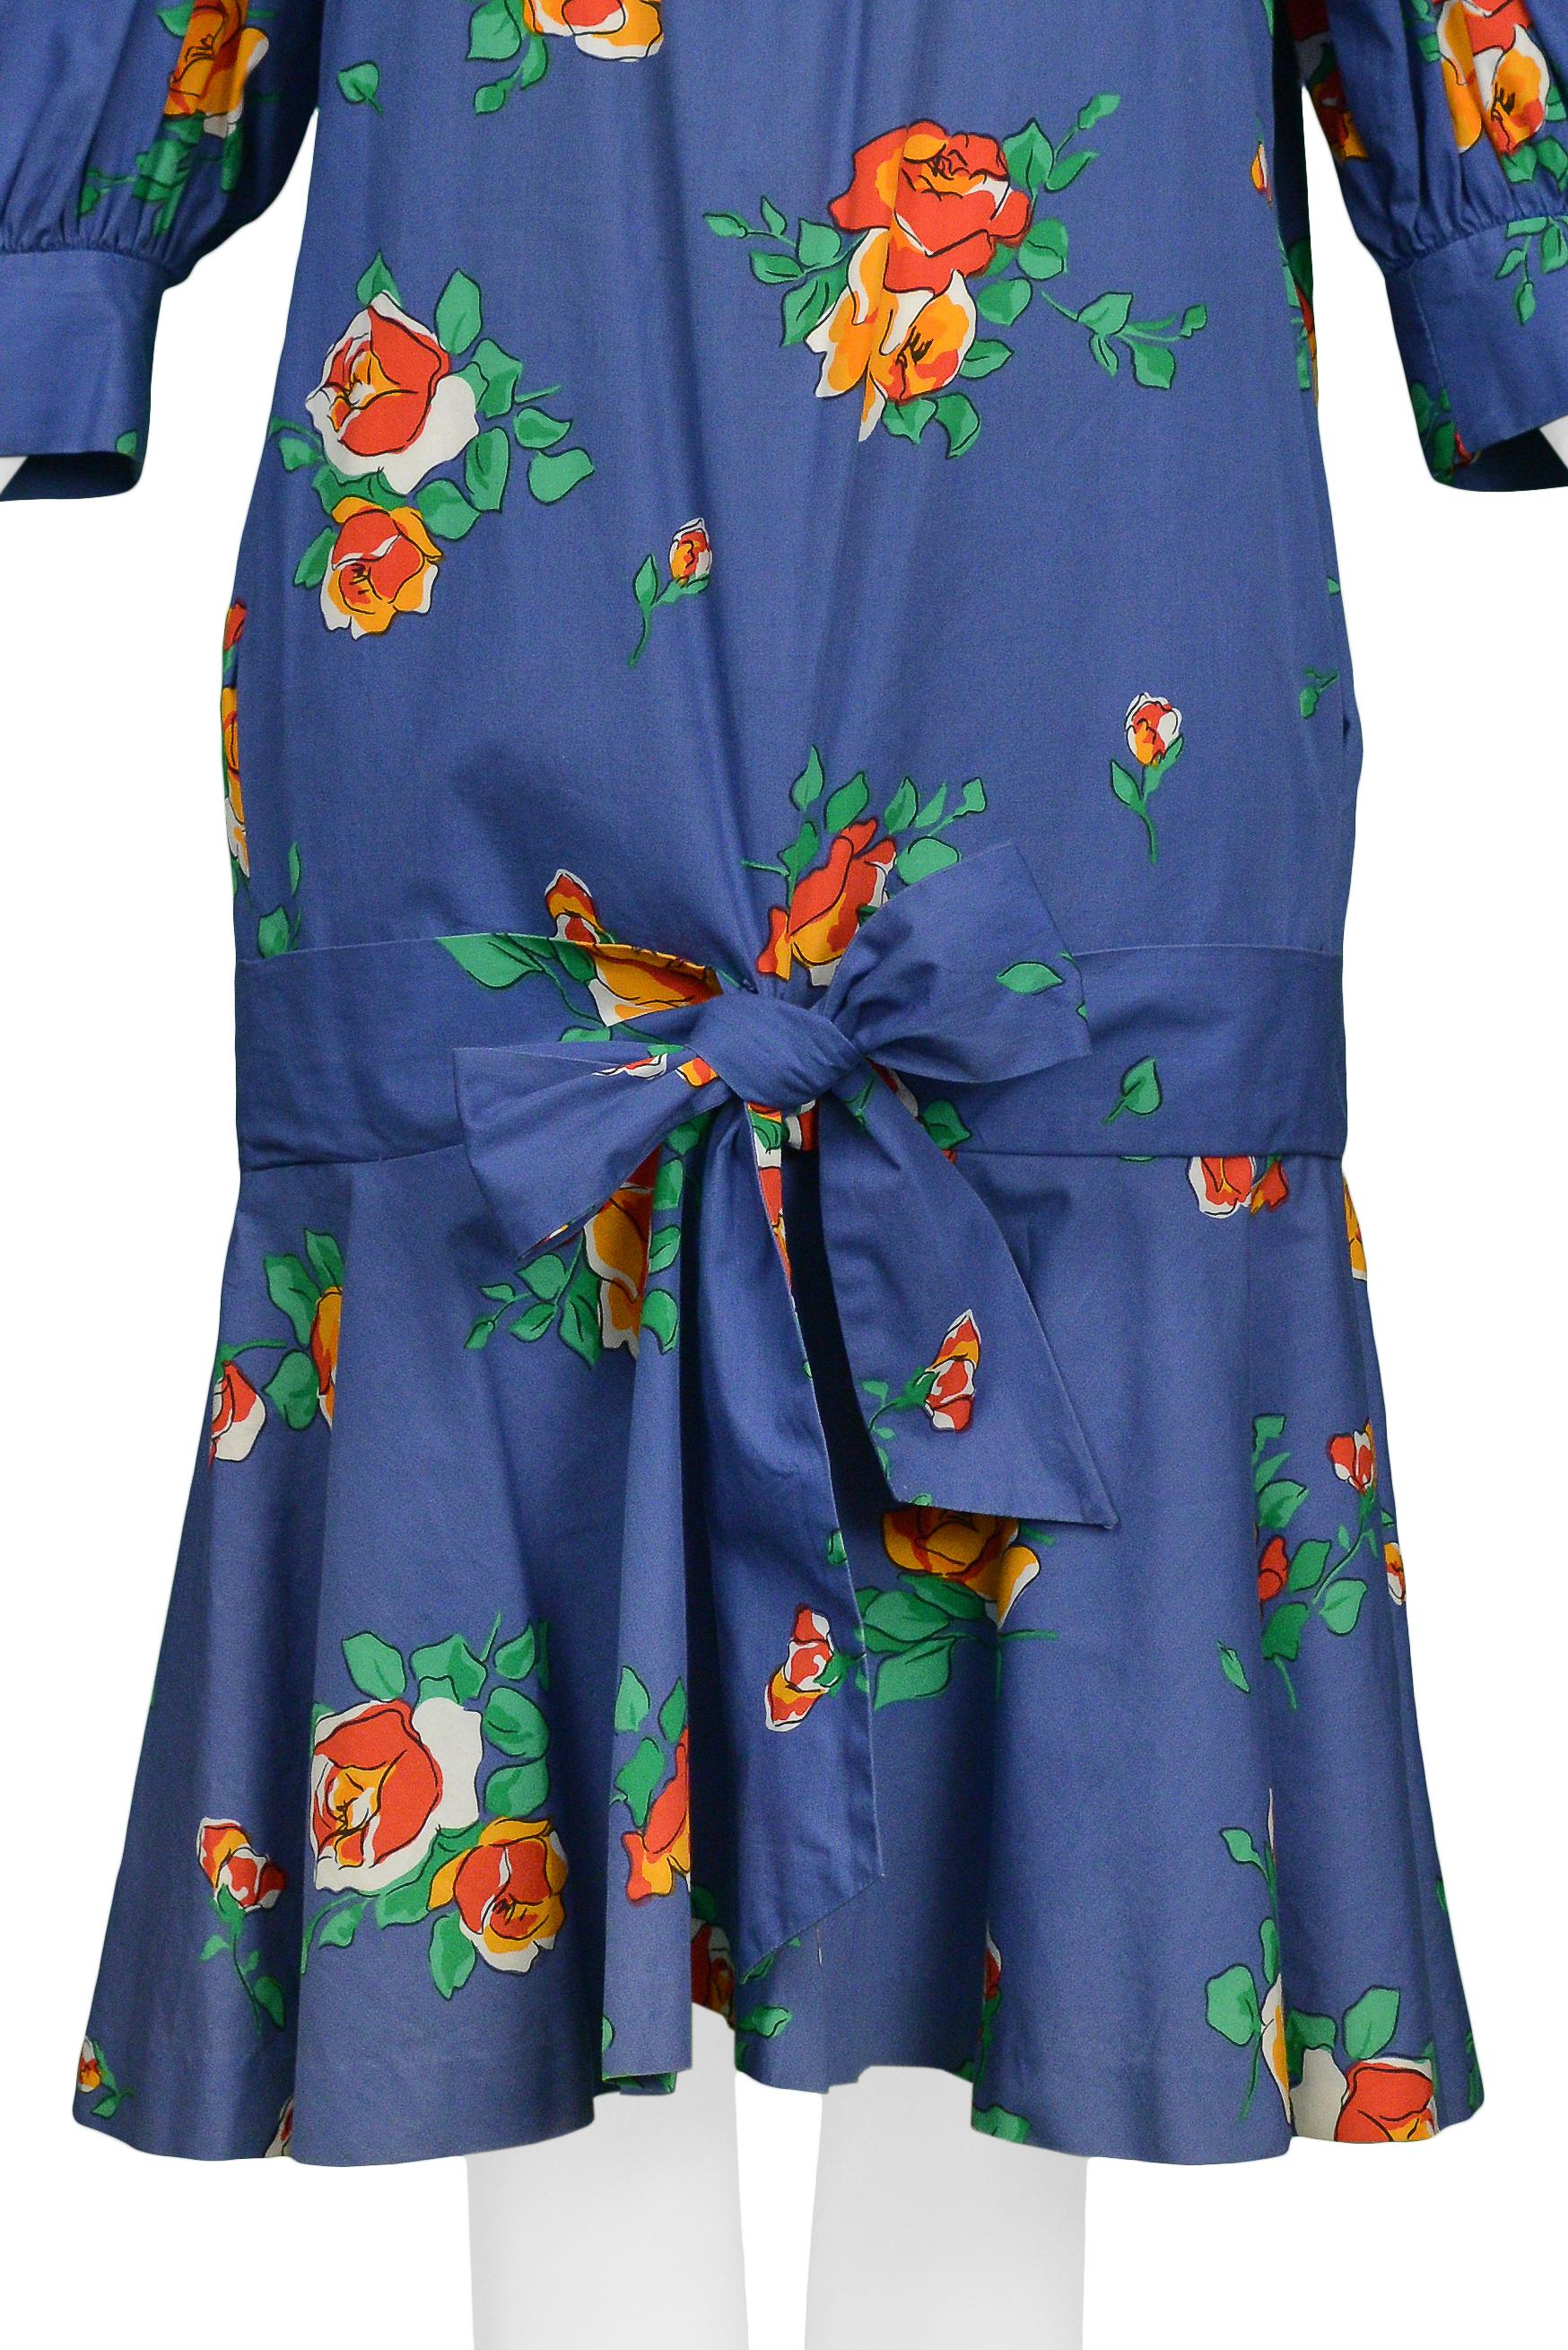 Yves Saint Laurent YSL Blue Floral Drop Dress In Excellent Condition For Sale In Los Angeles, CA